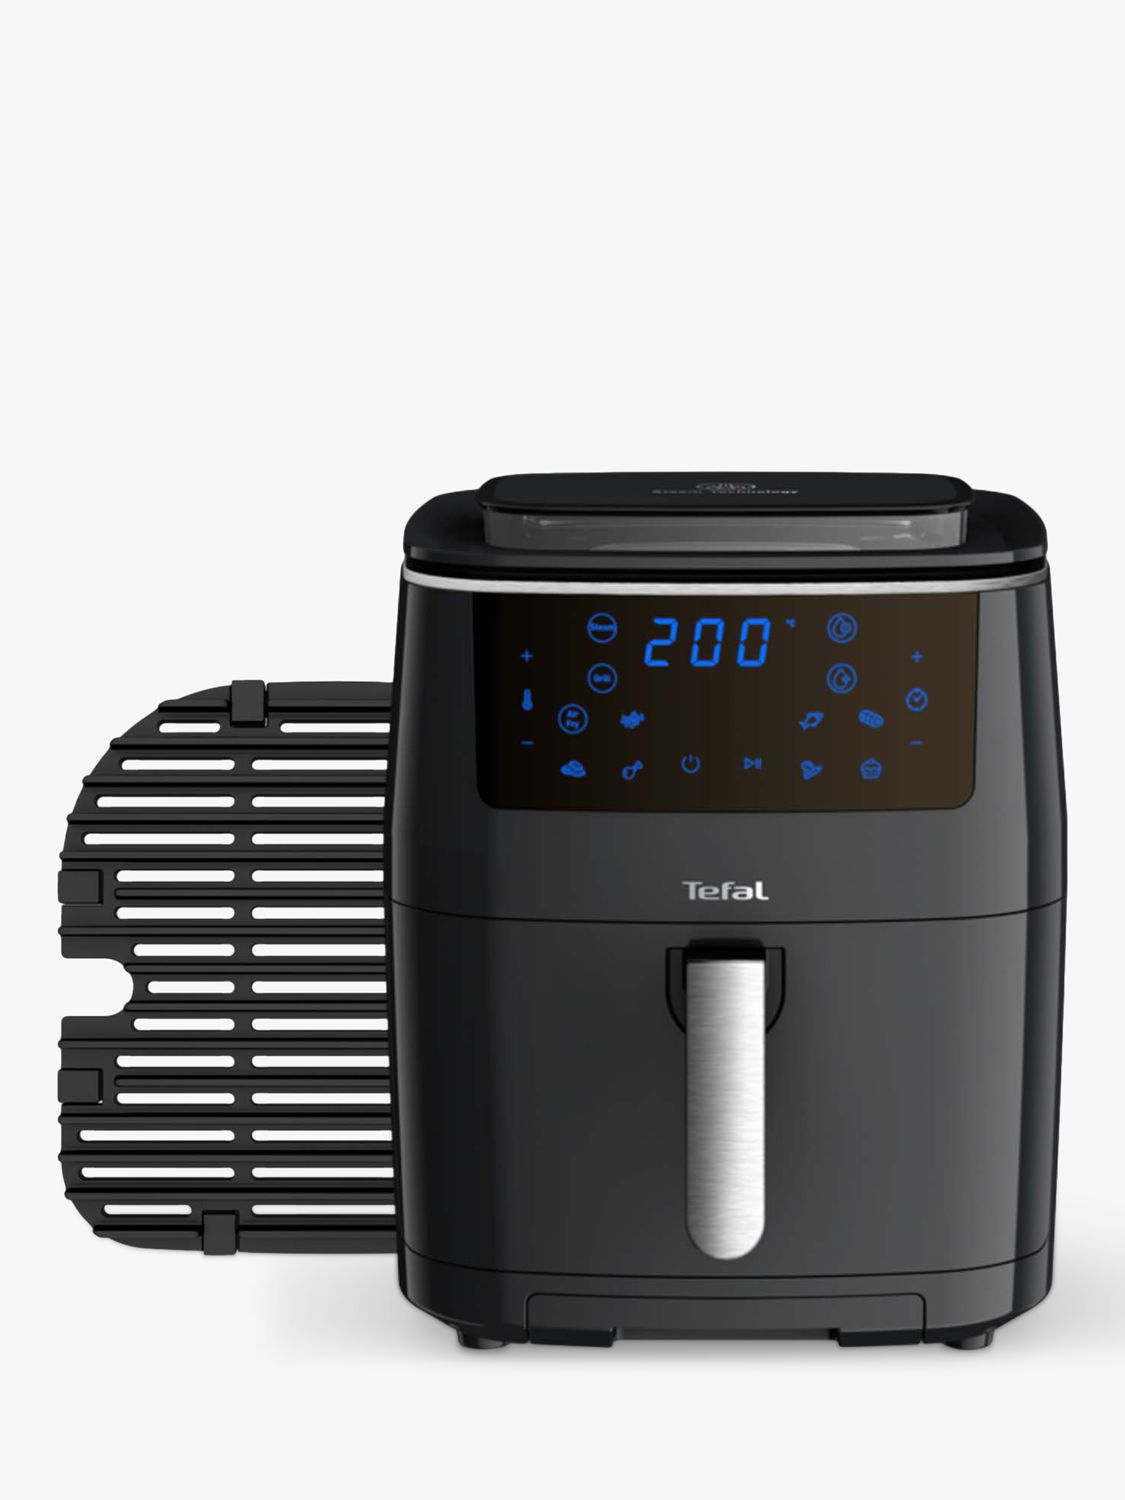 Tefal EasyFry Precision 2-in-1 air fryer and grill review - Reviews